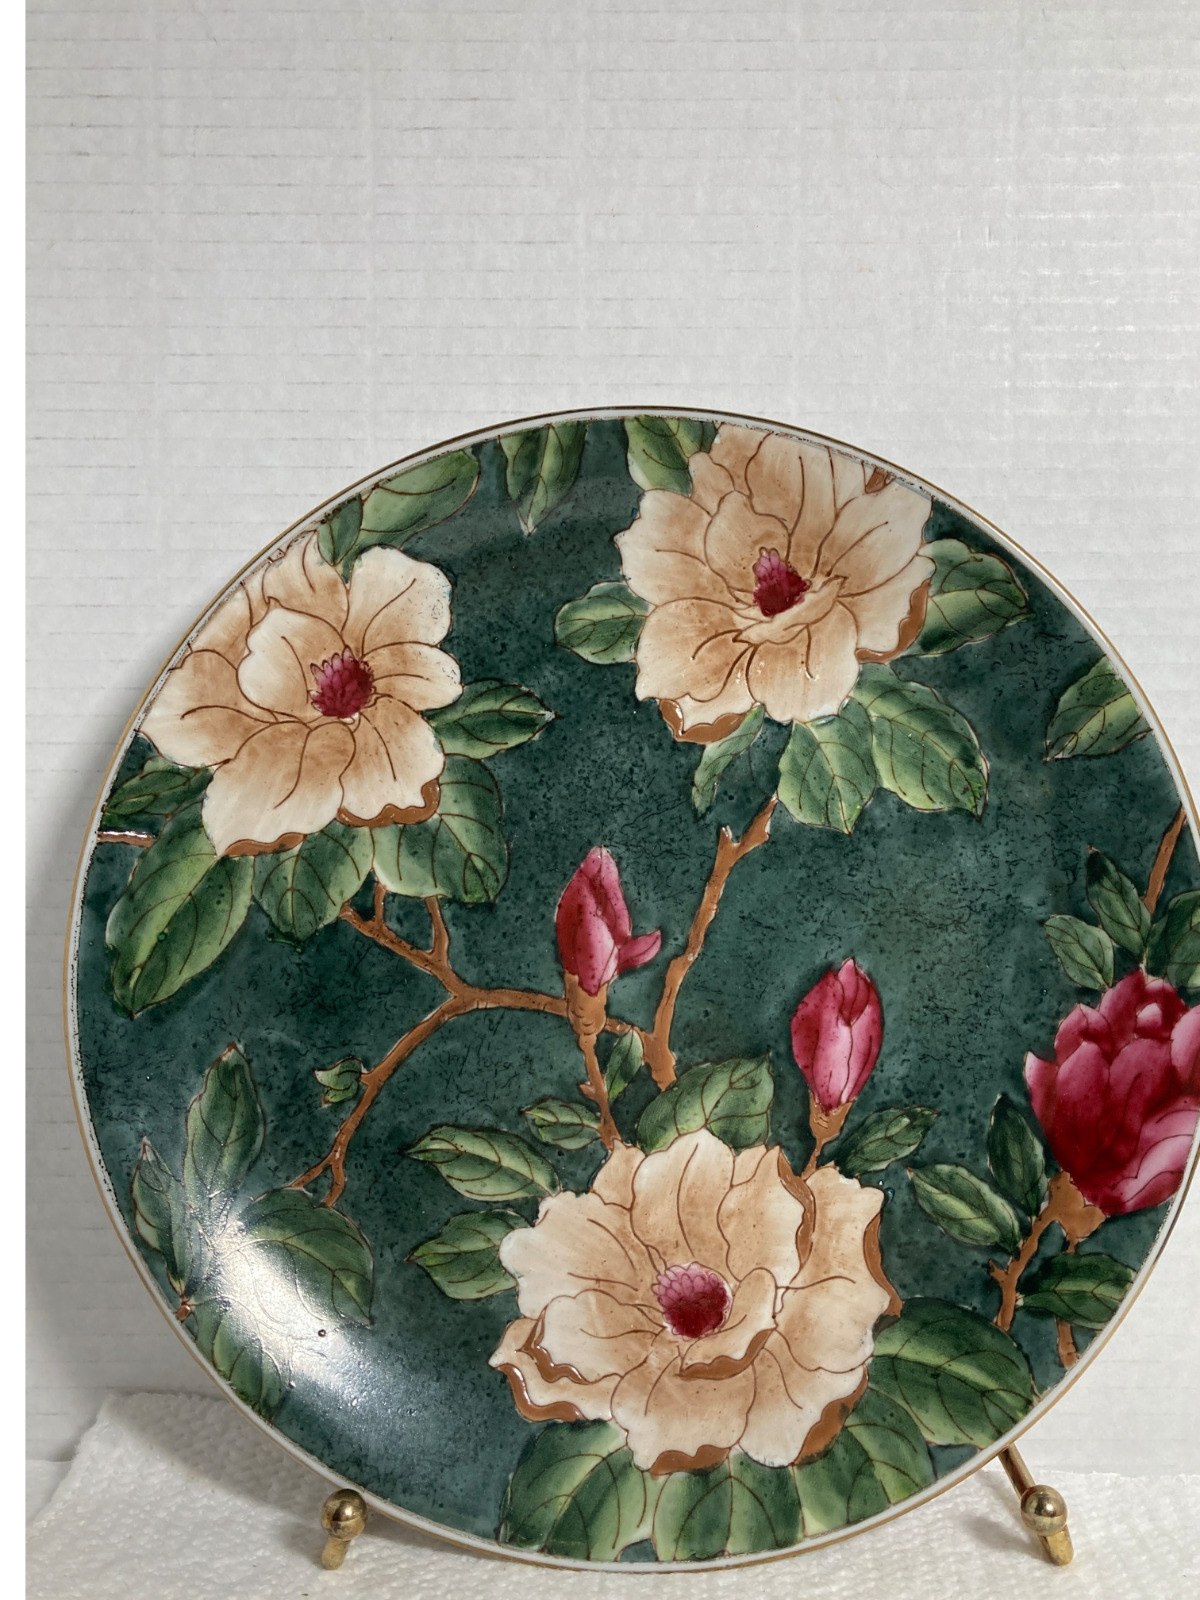 Decorative Wall / Tabletop Flowered Design Plate- NWT